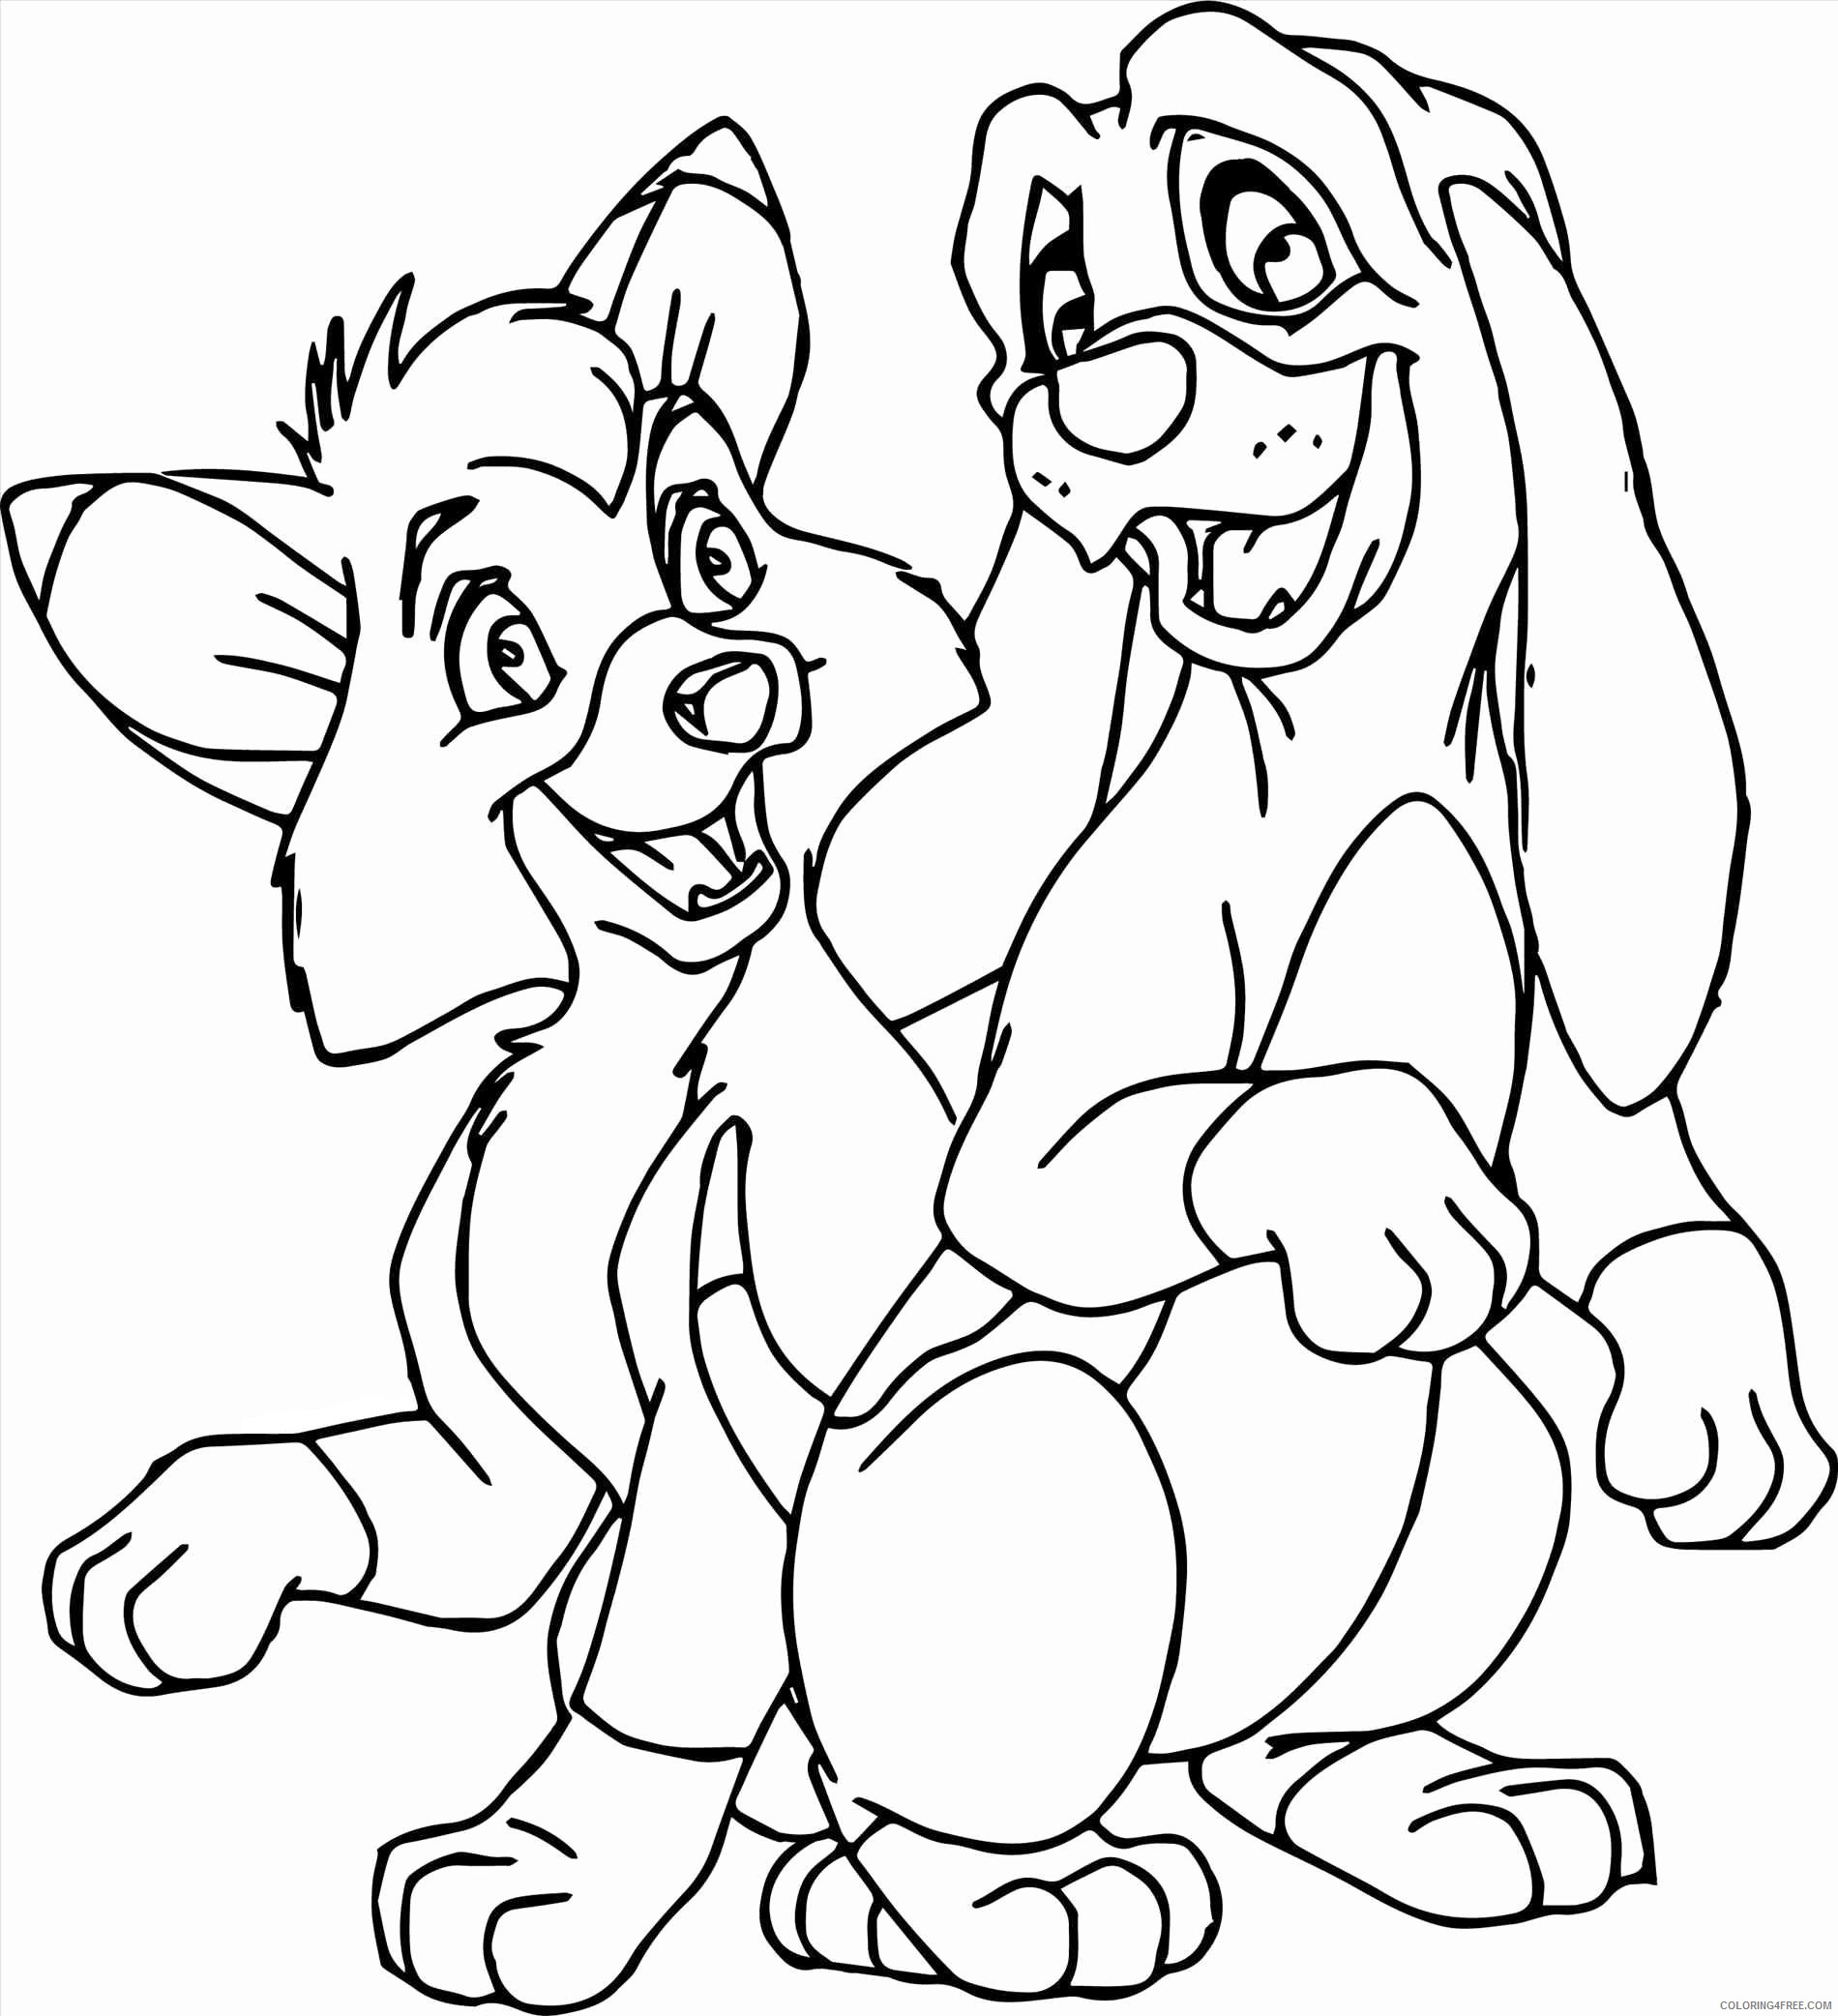 Fox and the Hound Coloring Pages Cartoons Best Friends Fox and the Hound Printable 2020 2765 Coloring4free